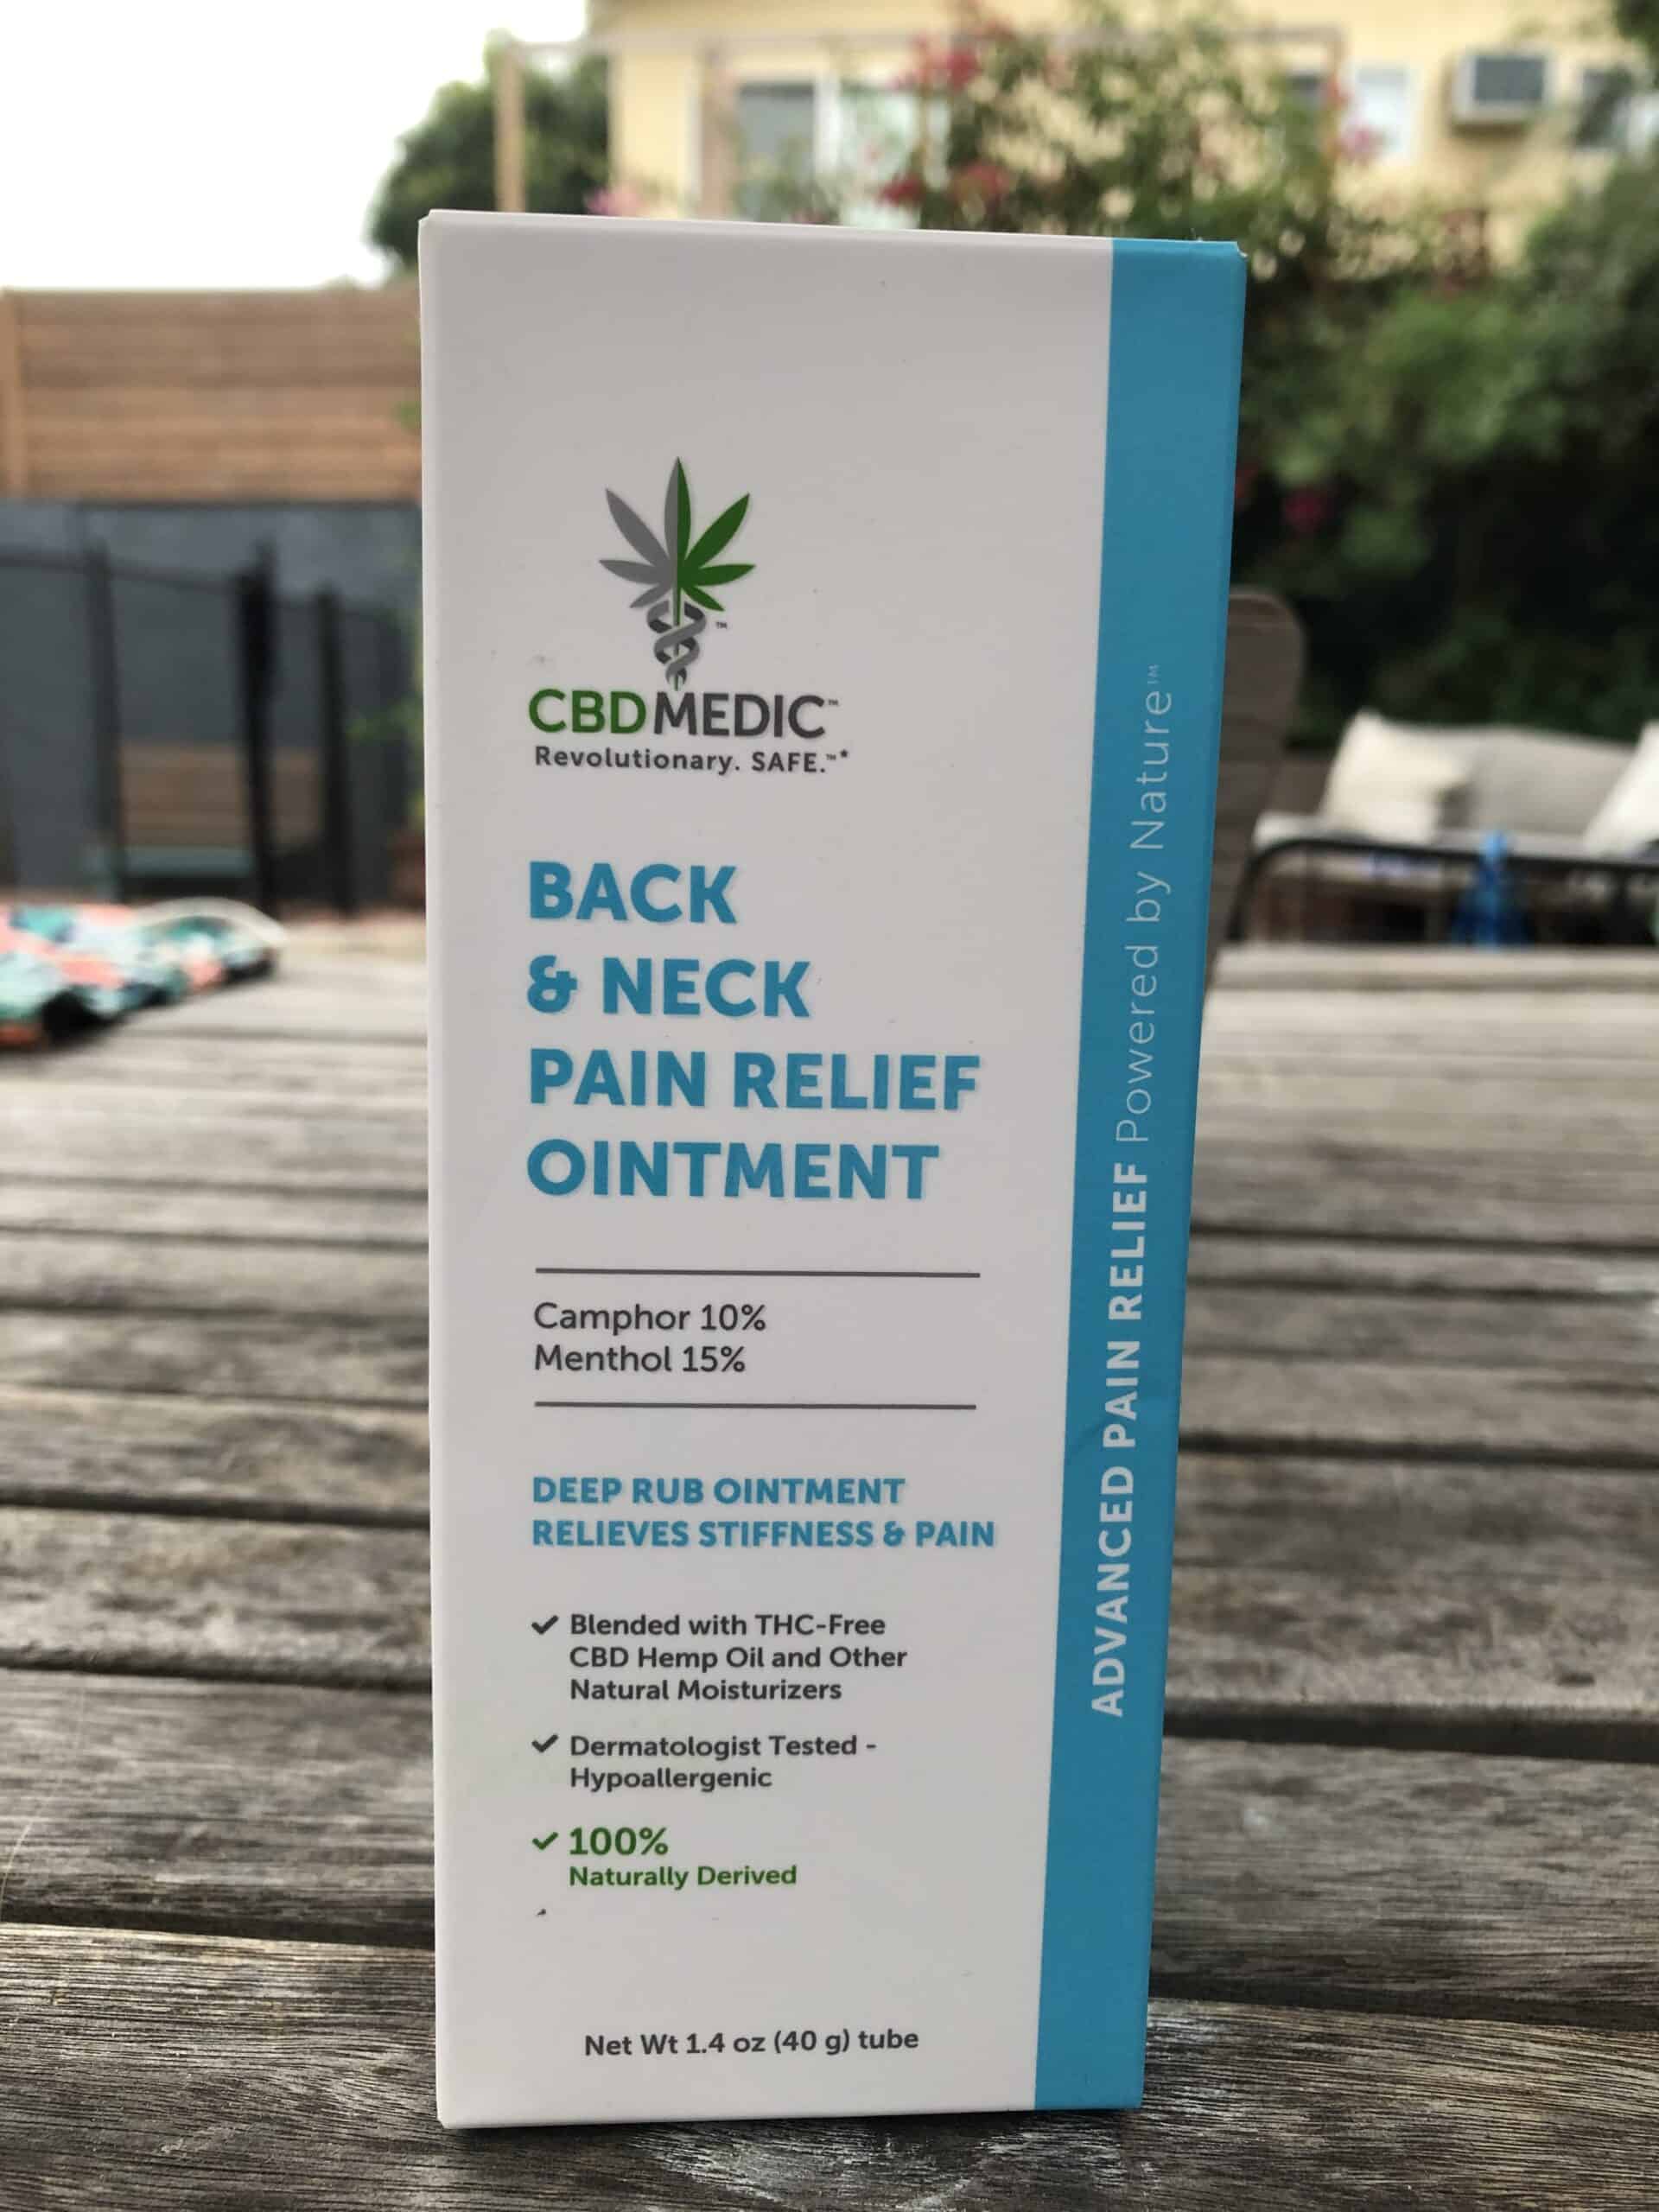 cbdmedic back and neck pain relief ointment save on cannabis review